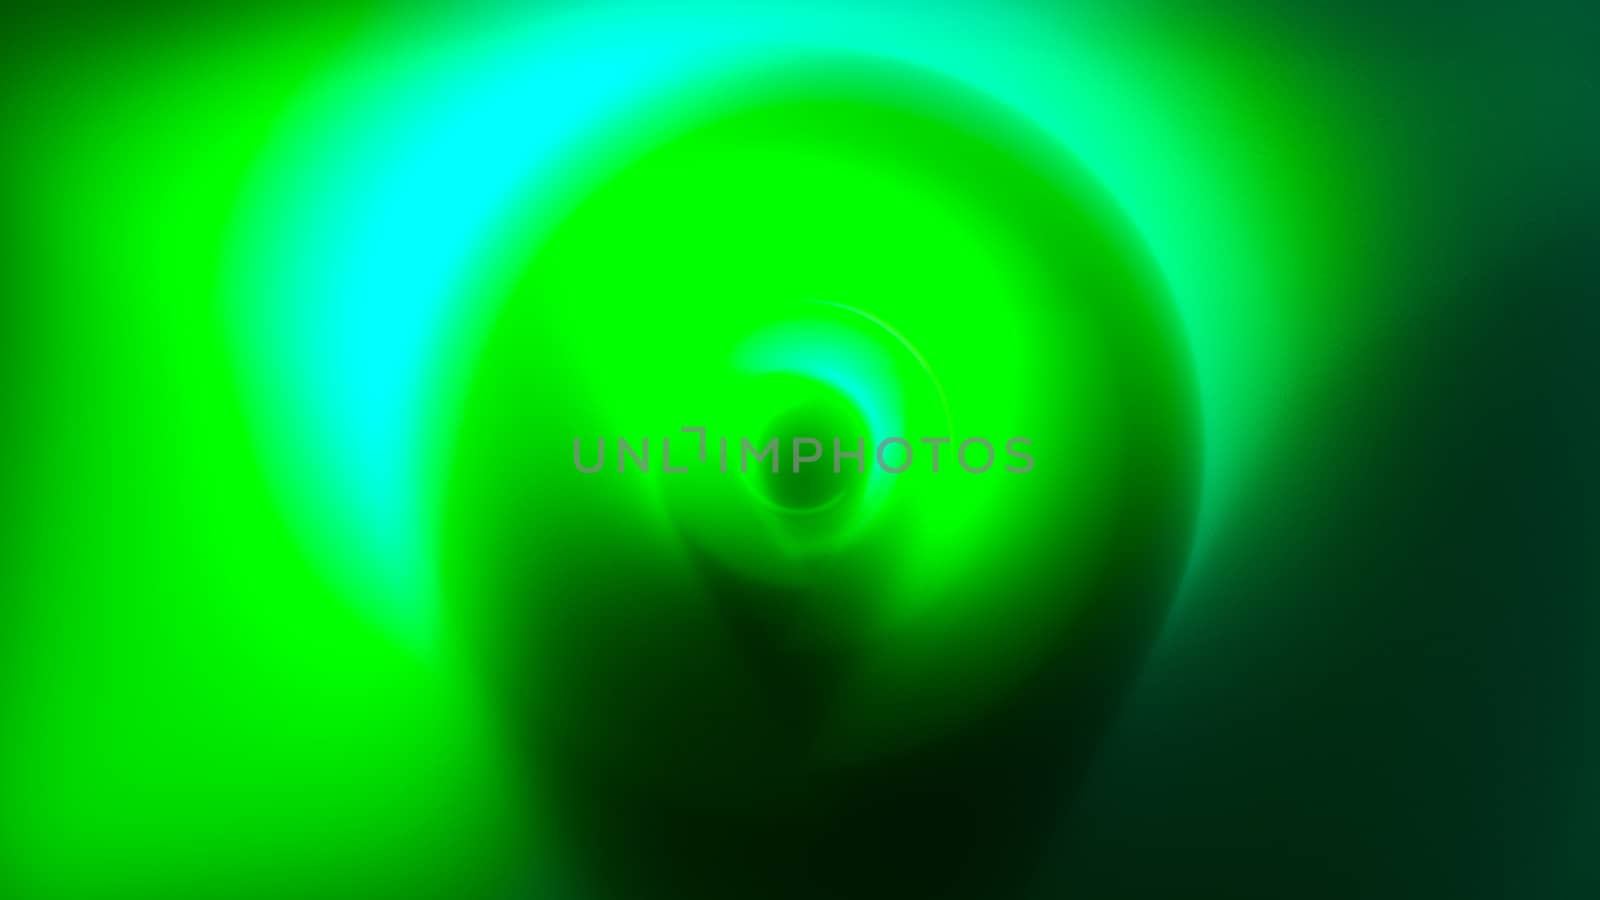 Abstract background of colorful spin radial motion blur by nolimit046